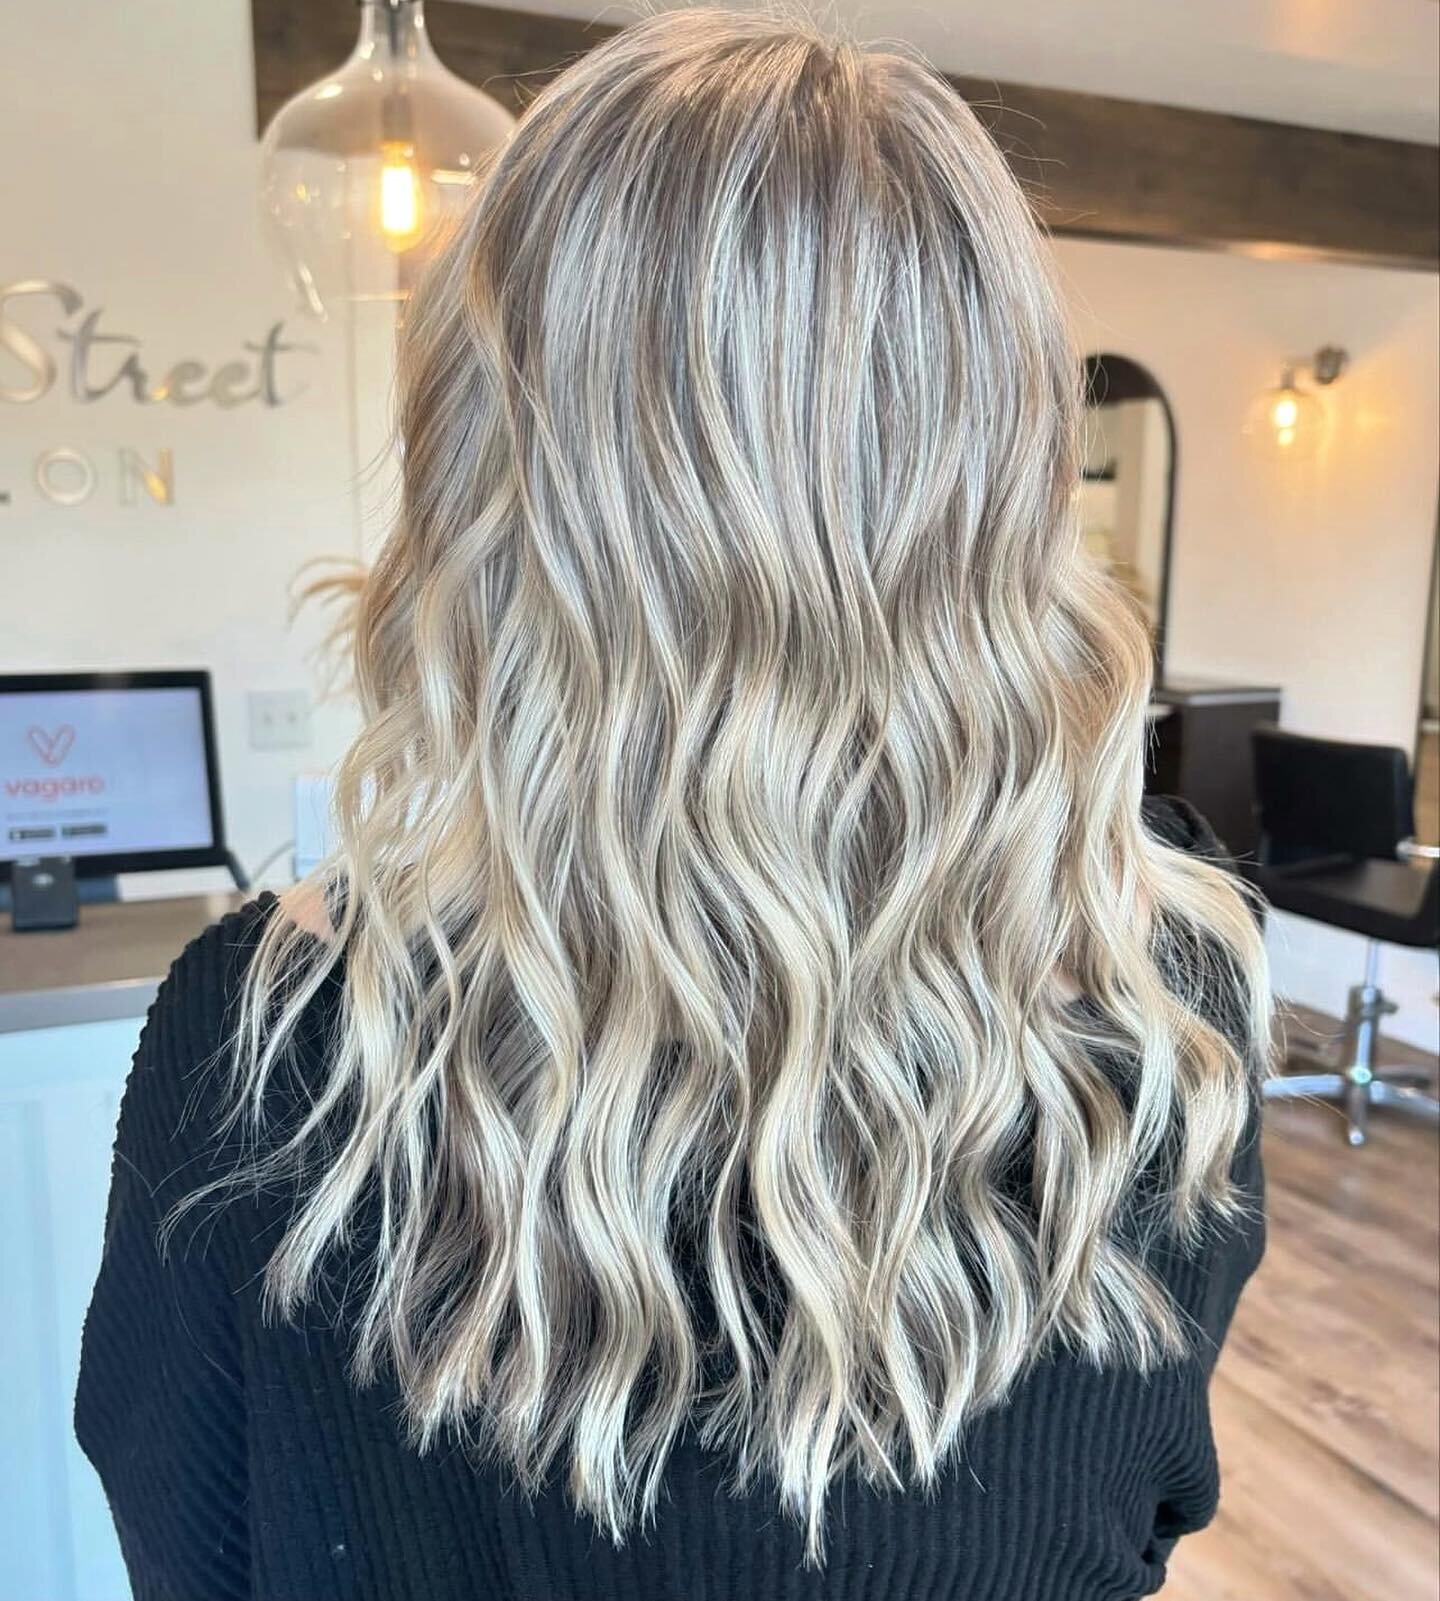 Full blonding beauty by @breah.themainstsalon 🫶🏼 

Let&rsquo;s get you brighter for spring! 

💻BOOK ONLINE WITH US VIA THE LINK IN BIO

#sumnerspremiersalon #sumnerwa #sumnerstylist #sumnerhair #sumnersalon #puyallupwashington #puyalluphairstylist